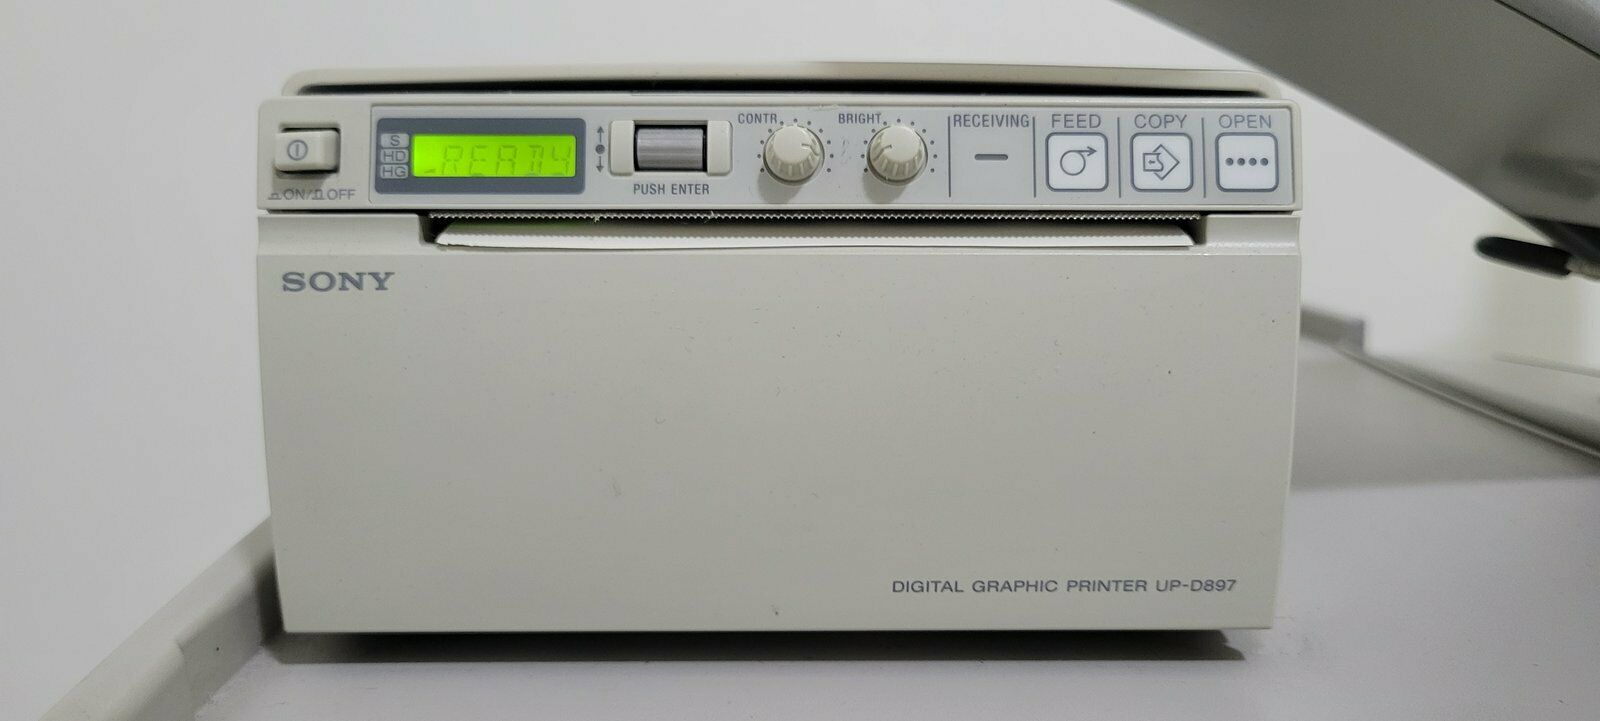 PHILIPS IE33 ULTRASOUND SYSTEM PARTS OR REPAIR 33100005132 DIAGNOSTIC ULTRASOUND MACHINES FOR SALE